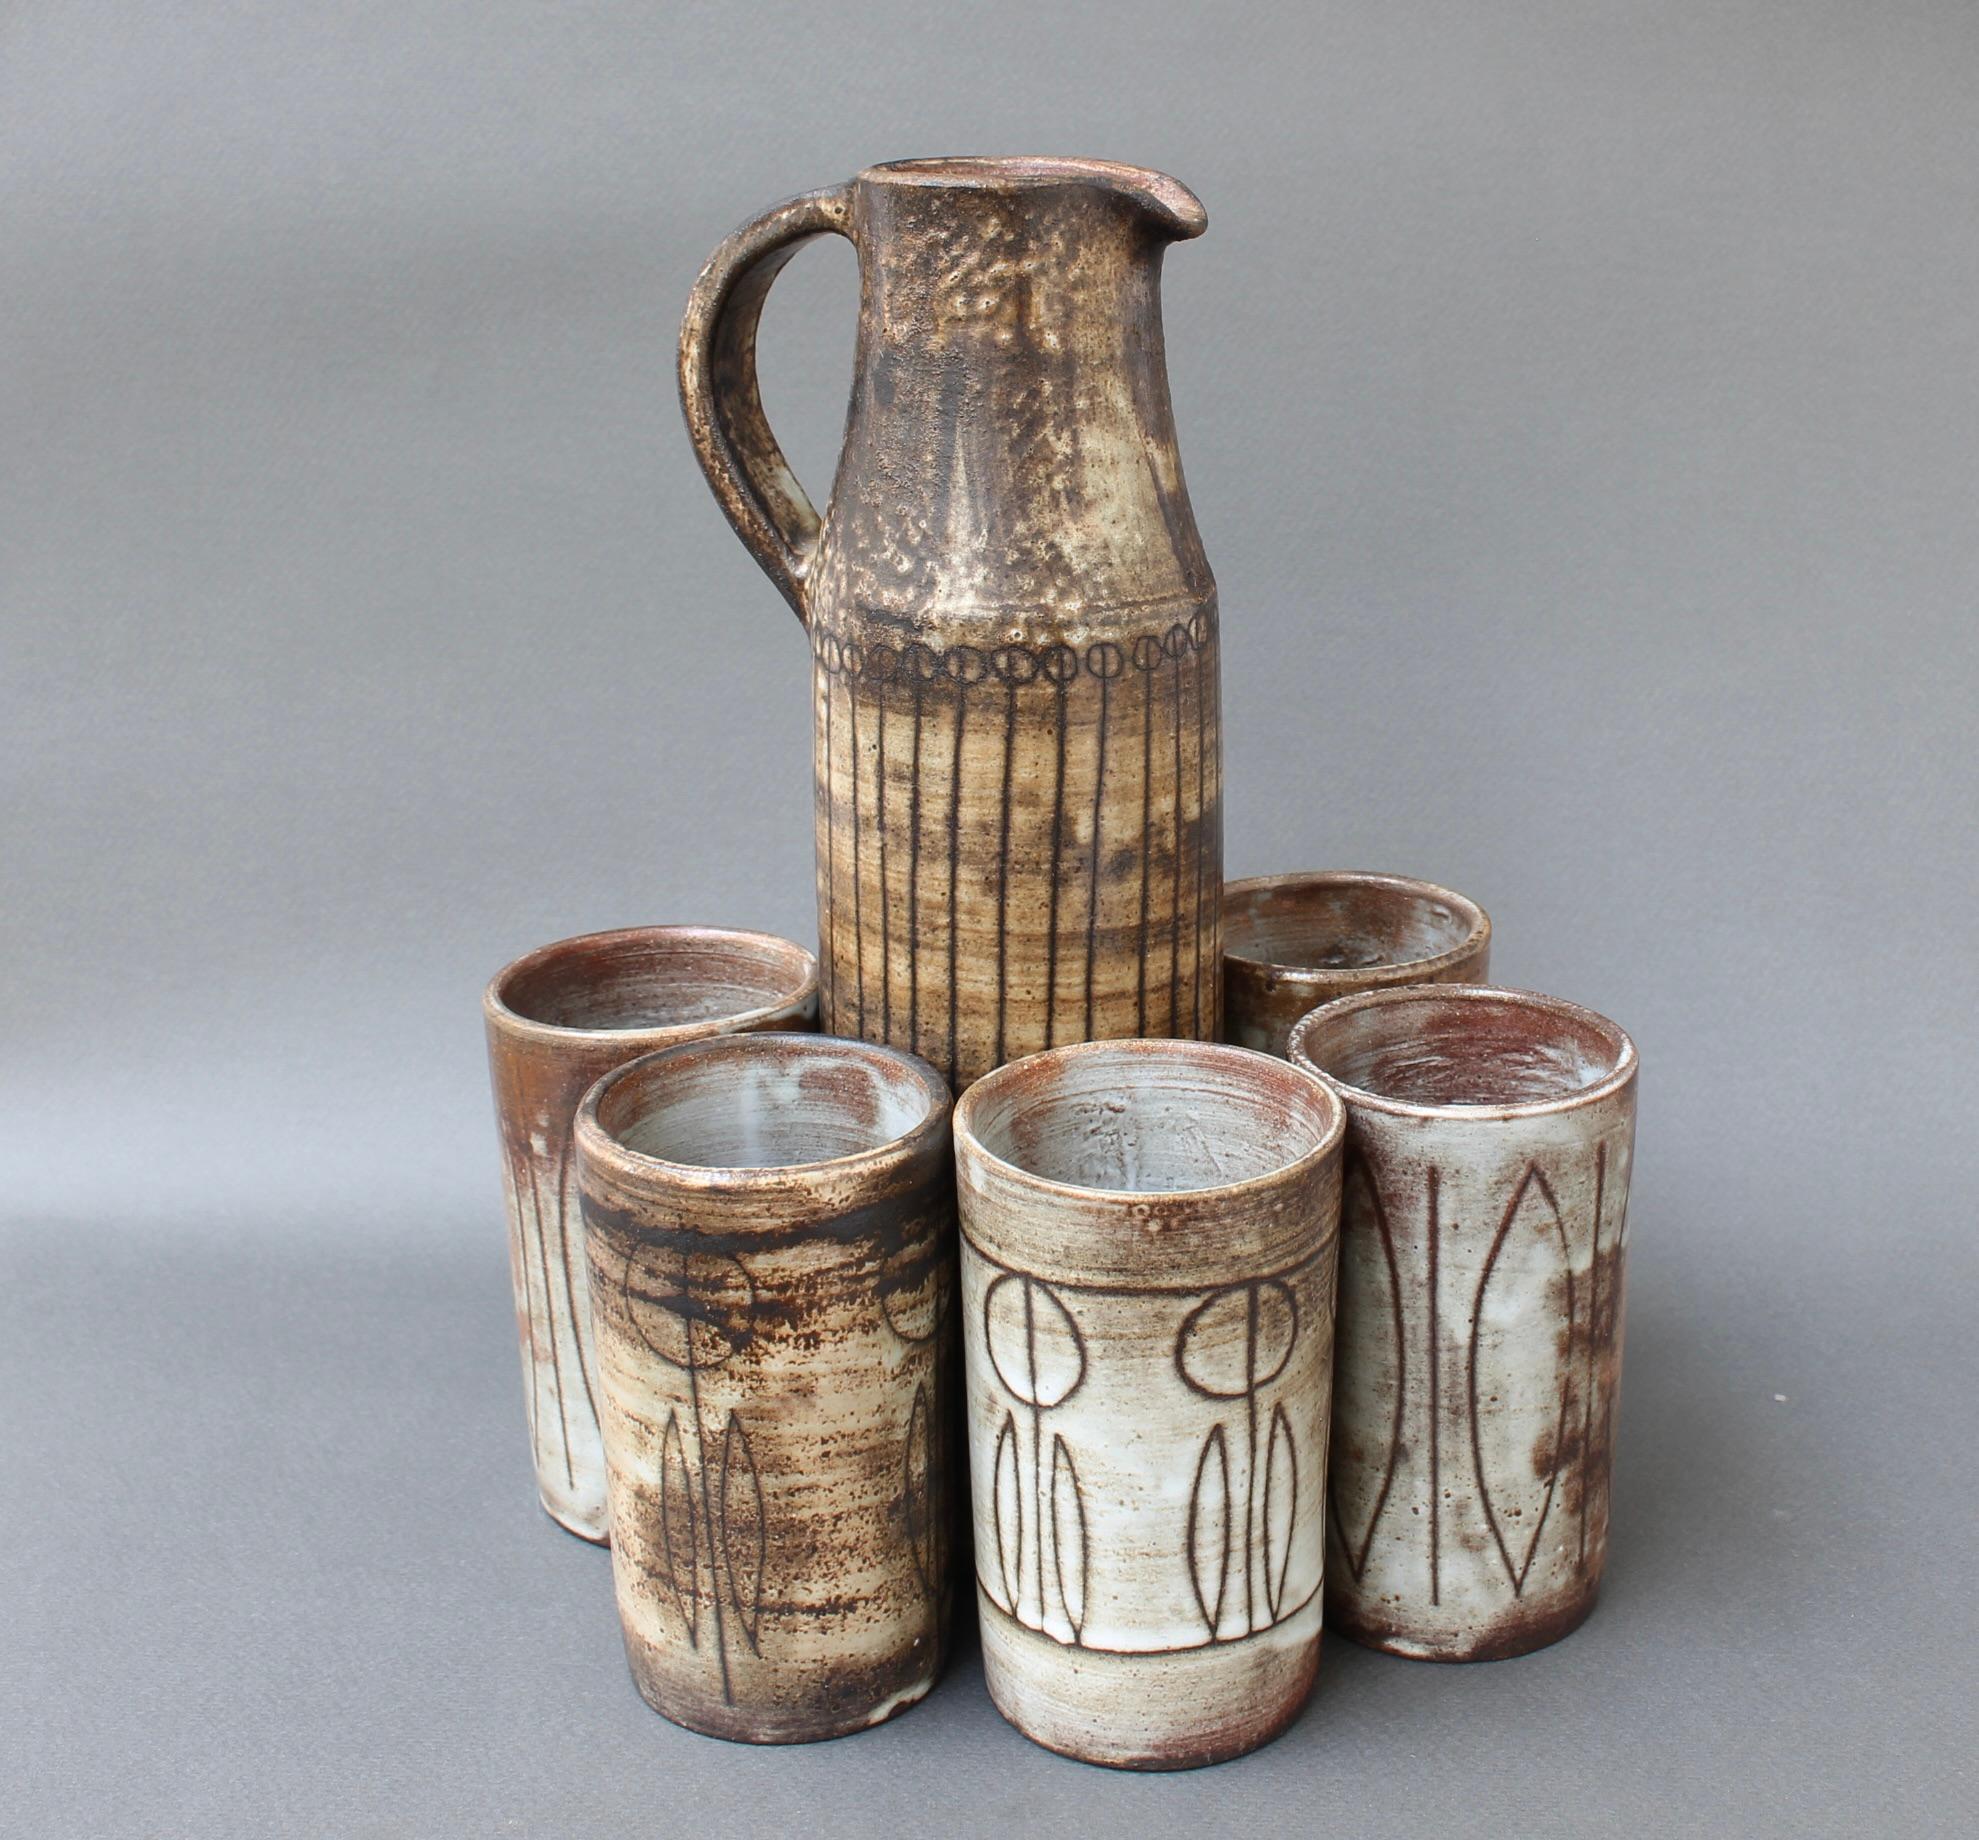 Vintage decorative ceramic drink set by Jacques Pouchain / Atelier Dieulefit (circa 1960s). Classic cylindrical vase/pitcher with sensuously curved handle in Pouchain's signature cloudy glaze style with earth tone hues. The cups are beautiful in